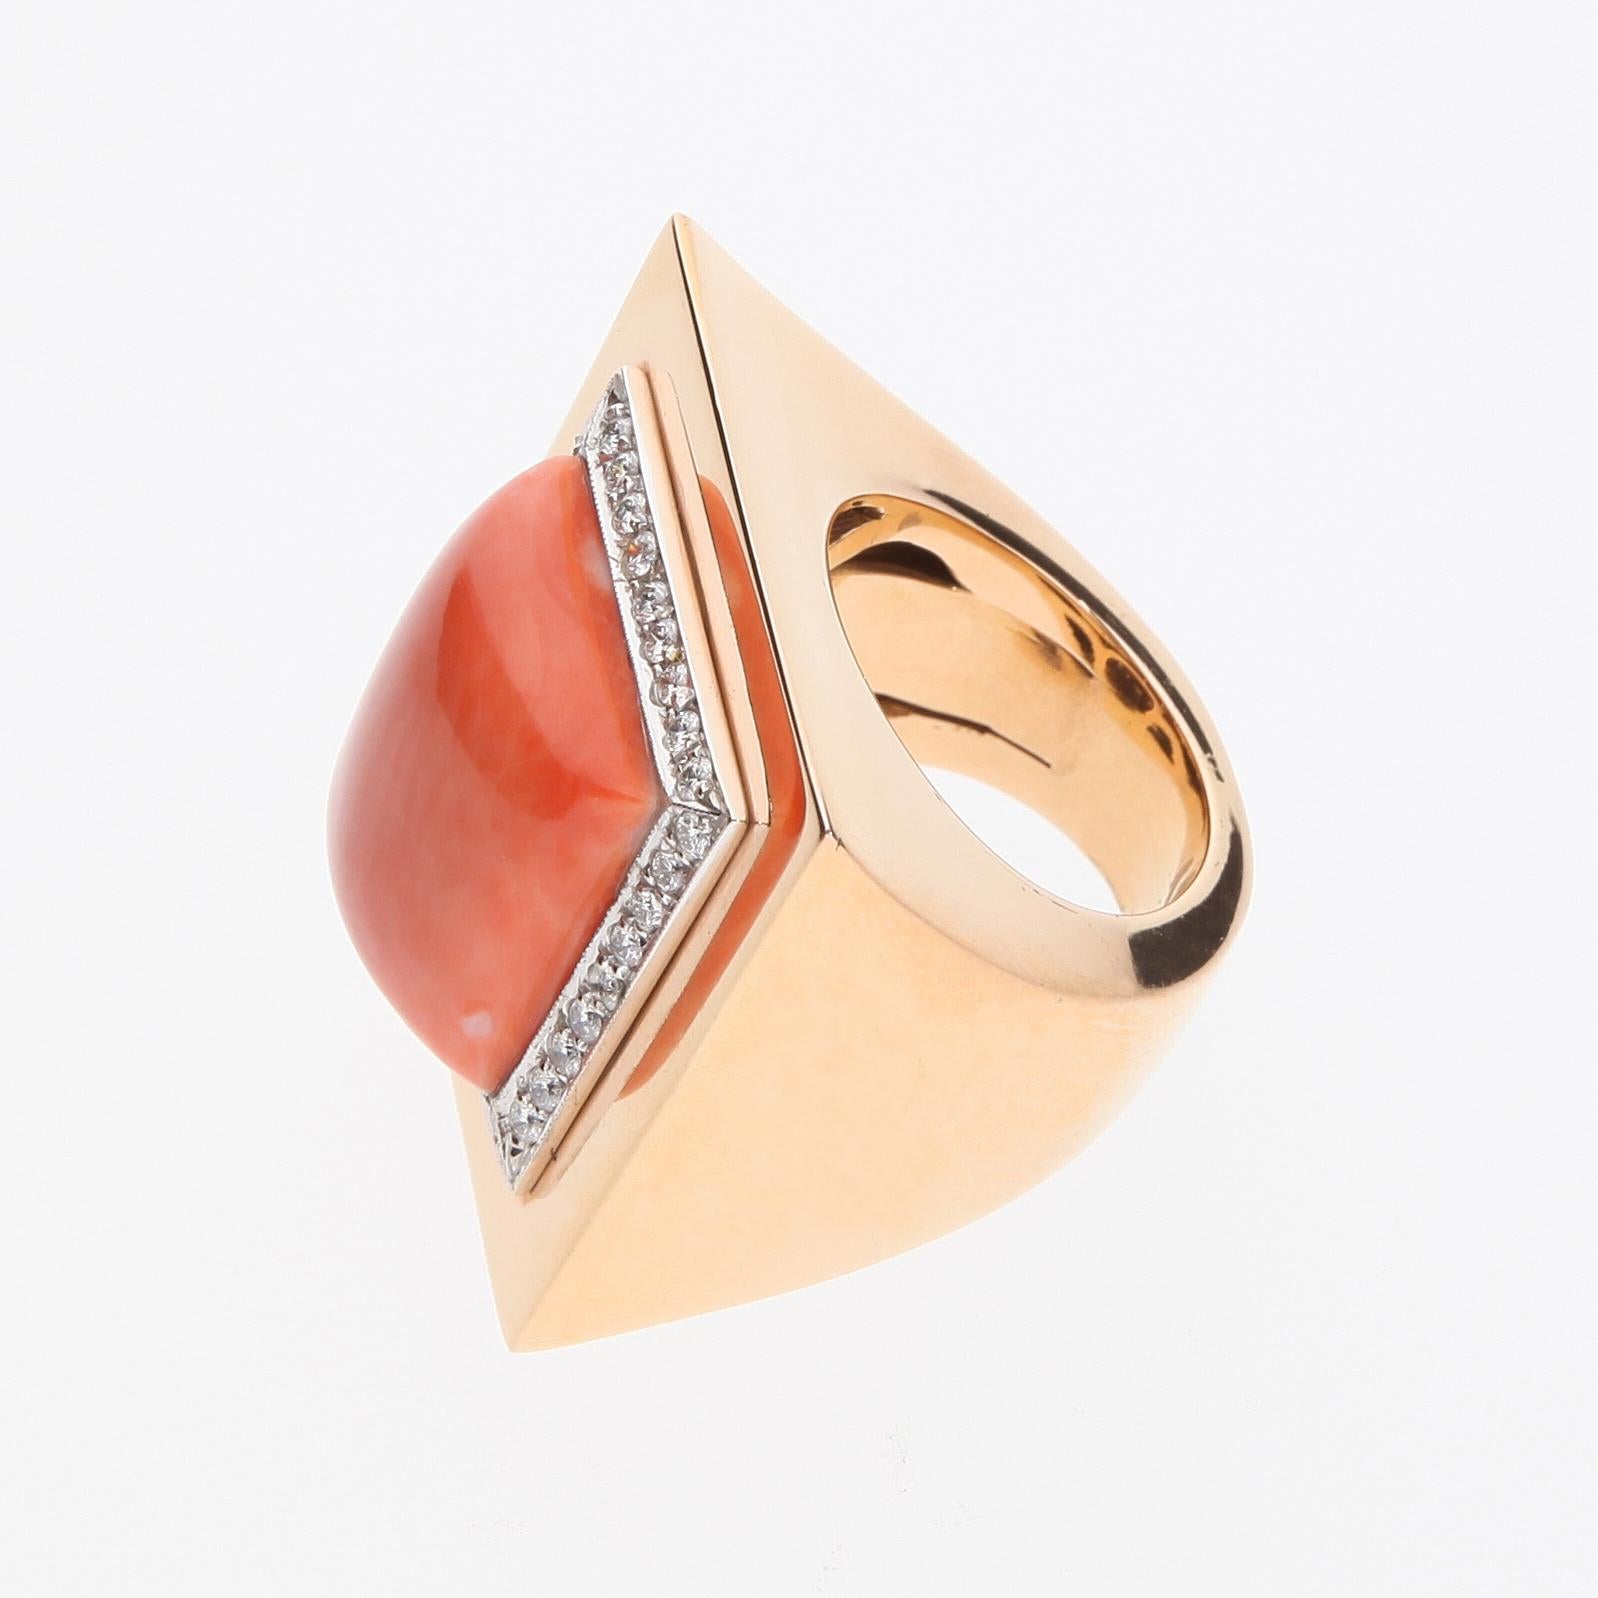 Salmon Coral Ring Surrounded by 36 Diamonds. 18 Kt Rose Gold. Handmade in Italy. For Sale 2